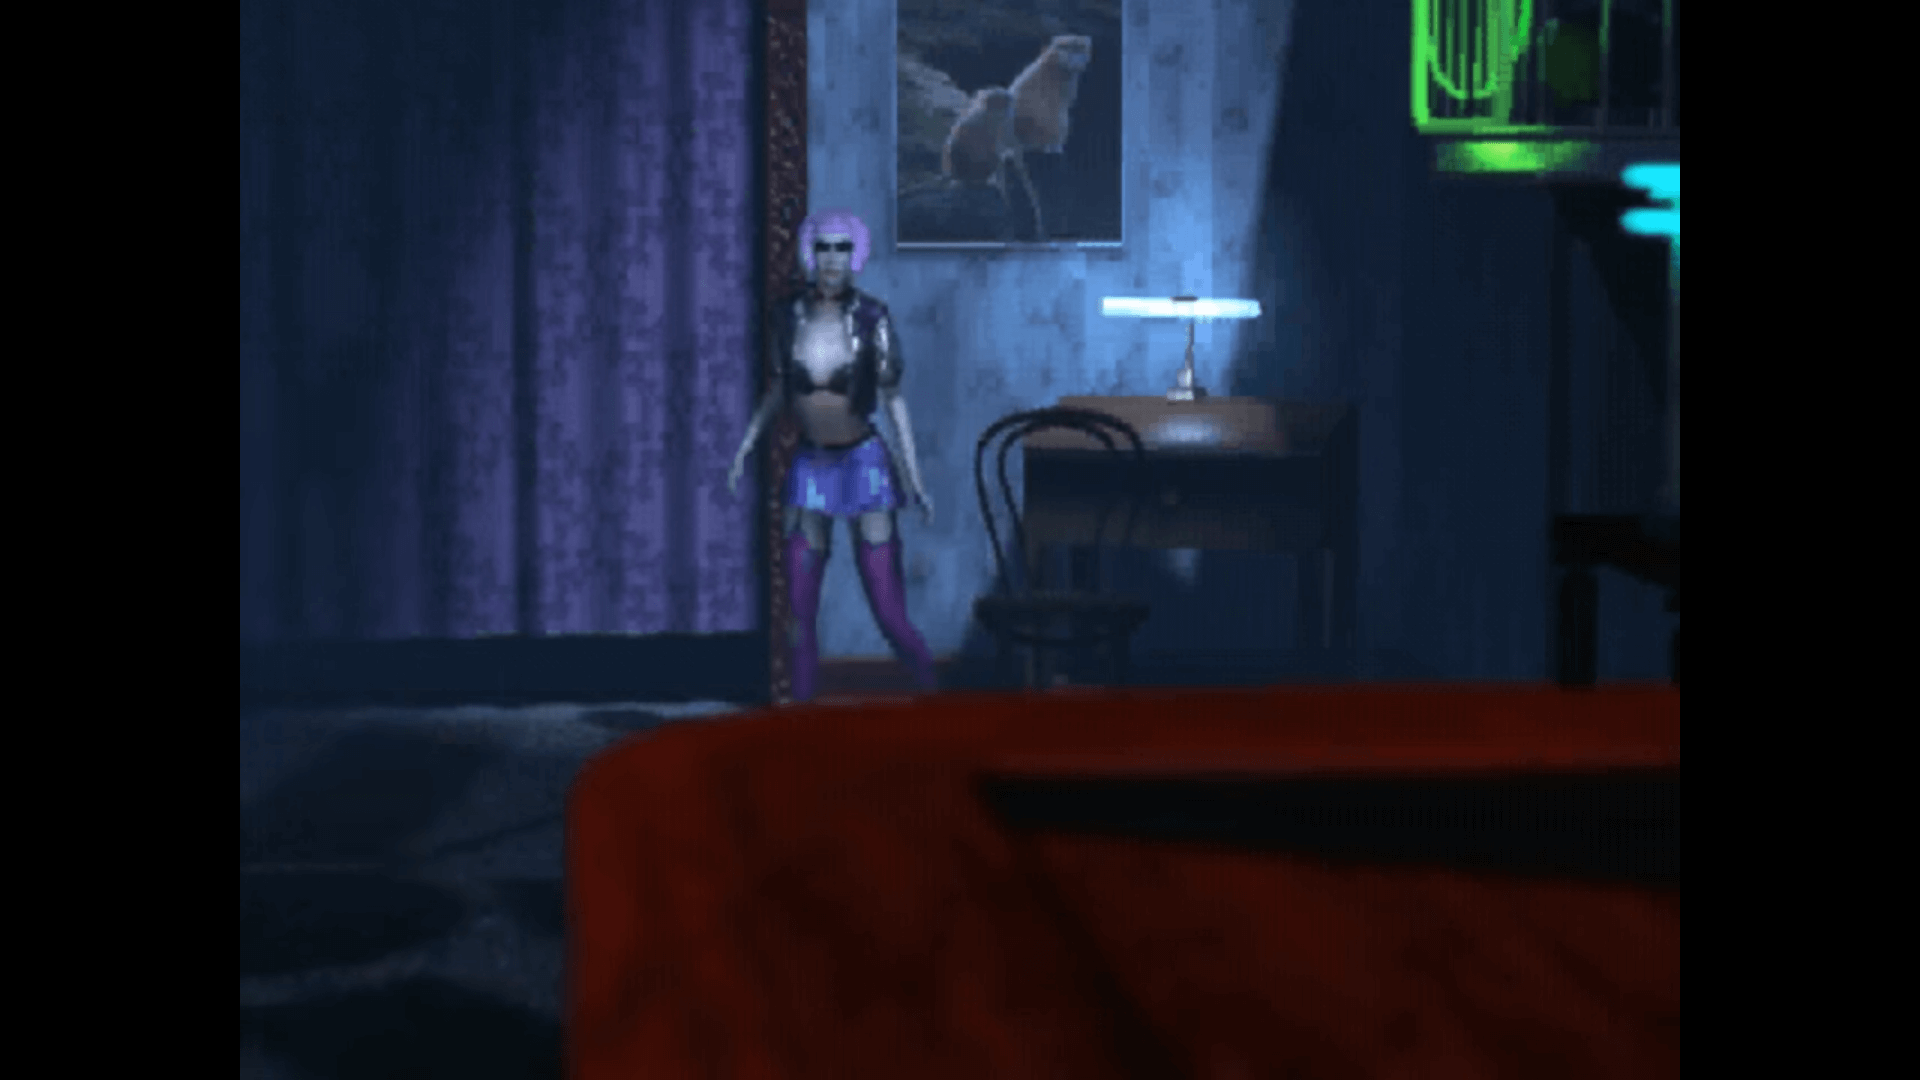 An image of a late 90s character model from original Blade Runner game